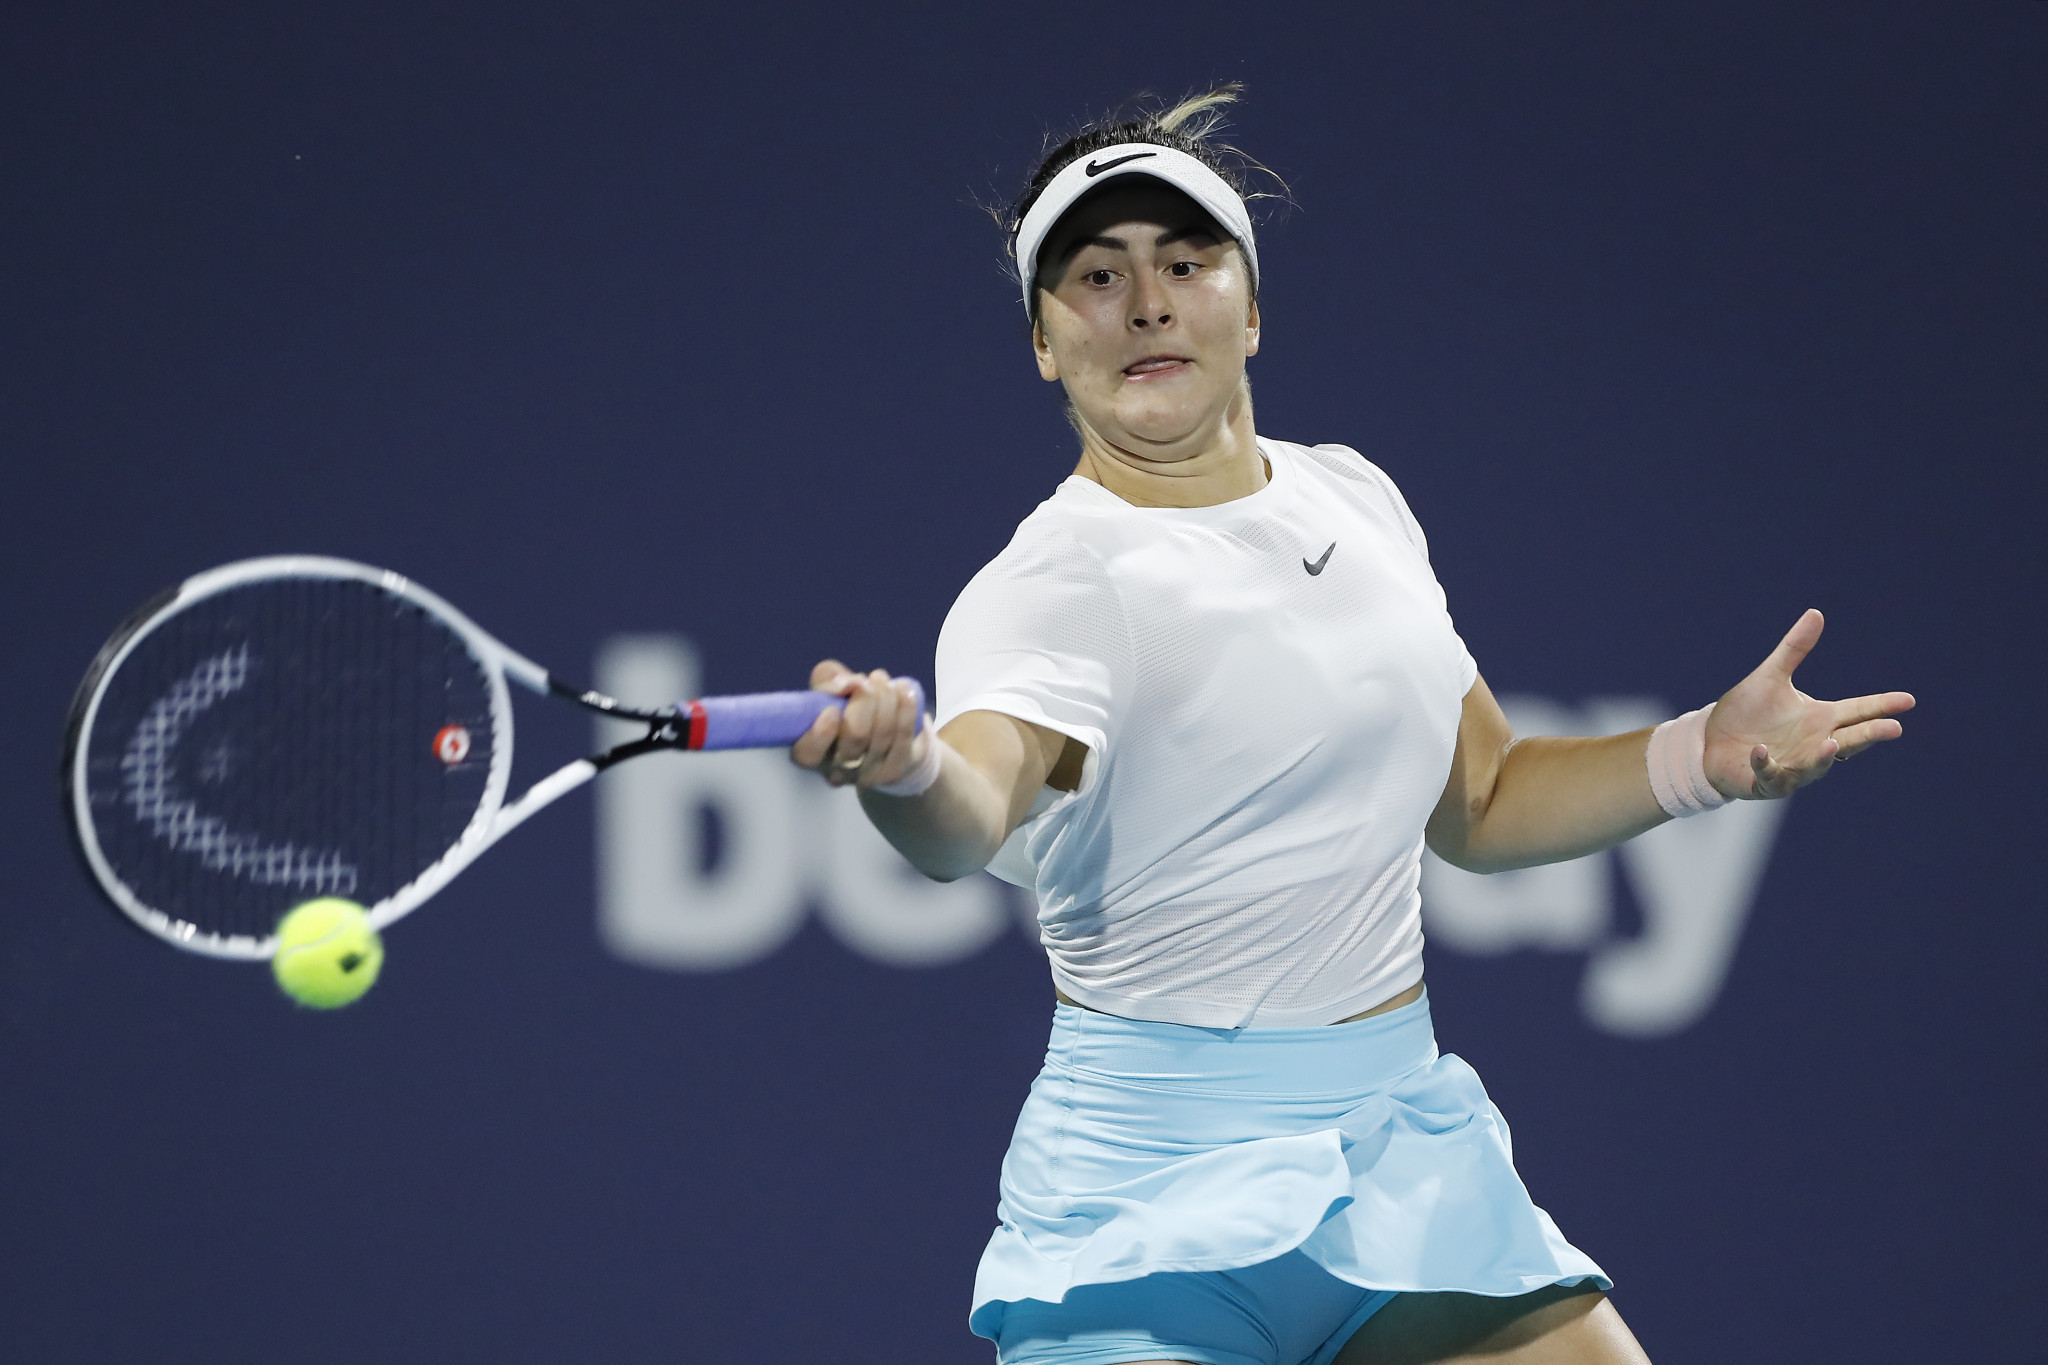 Andreescu overcomes Sakkari in early hours to reach Miami Open final